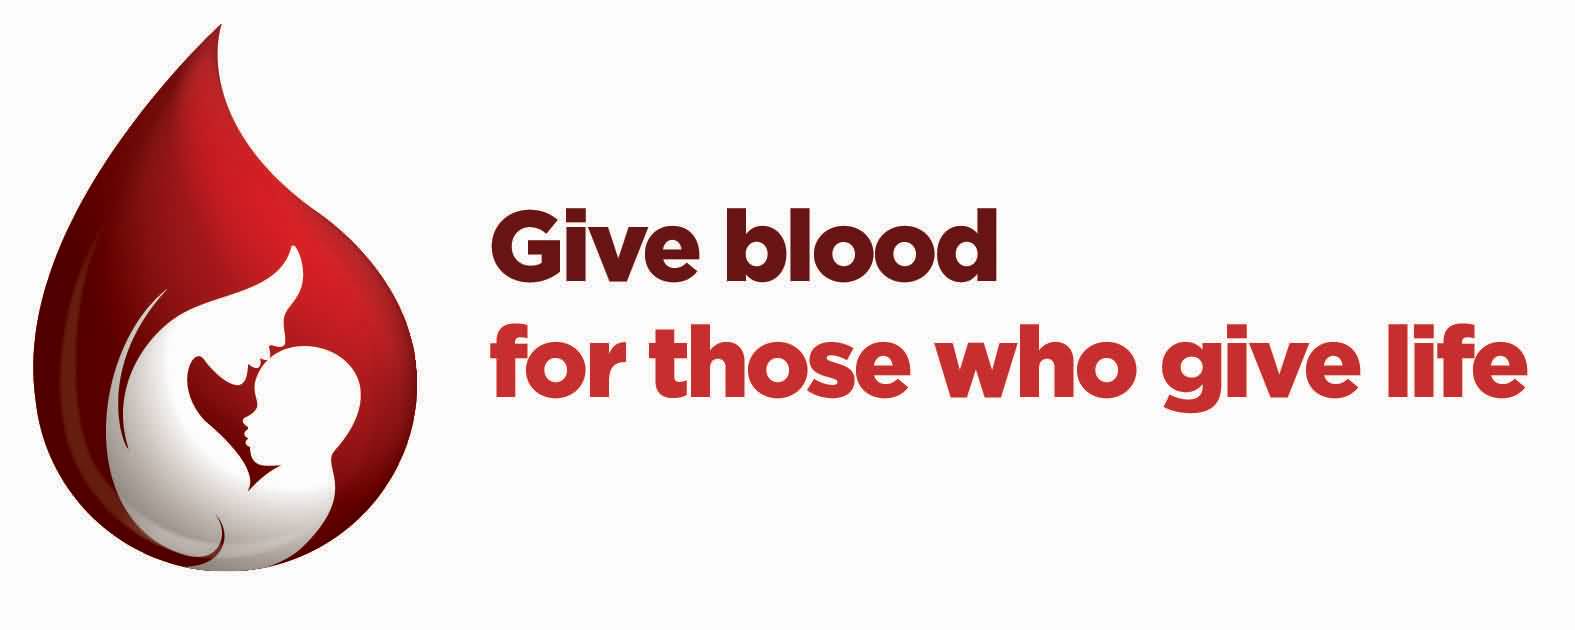 Give Blood For Those Who Give Life - World Blood Donor Day Slogans